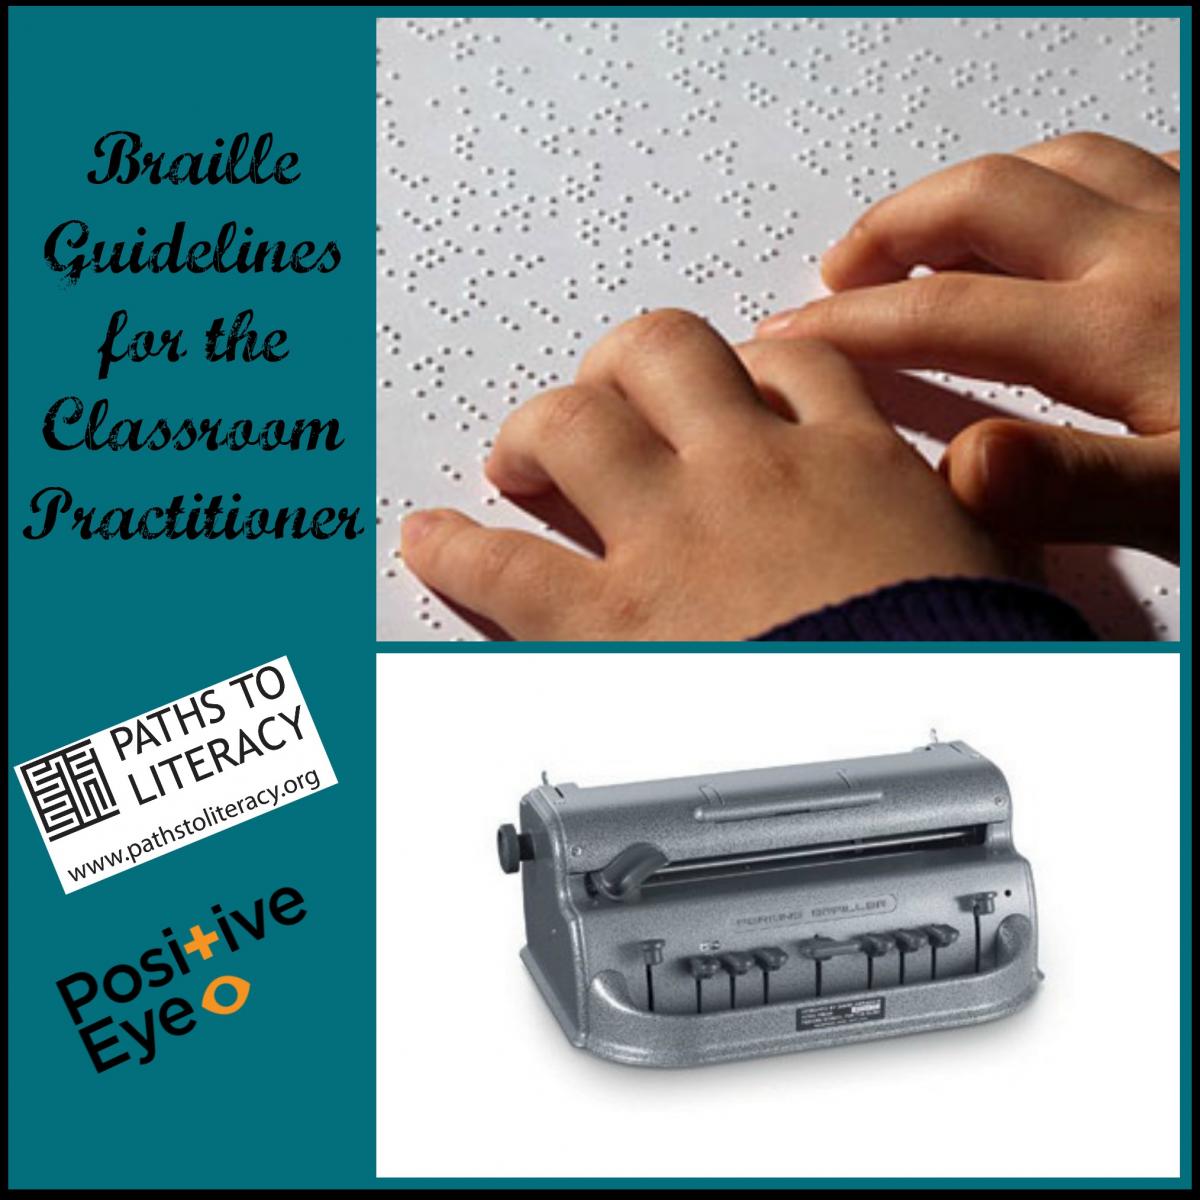 Braille Guidelines for the Classroom Practitioner